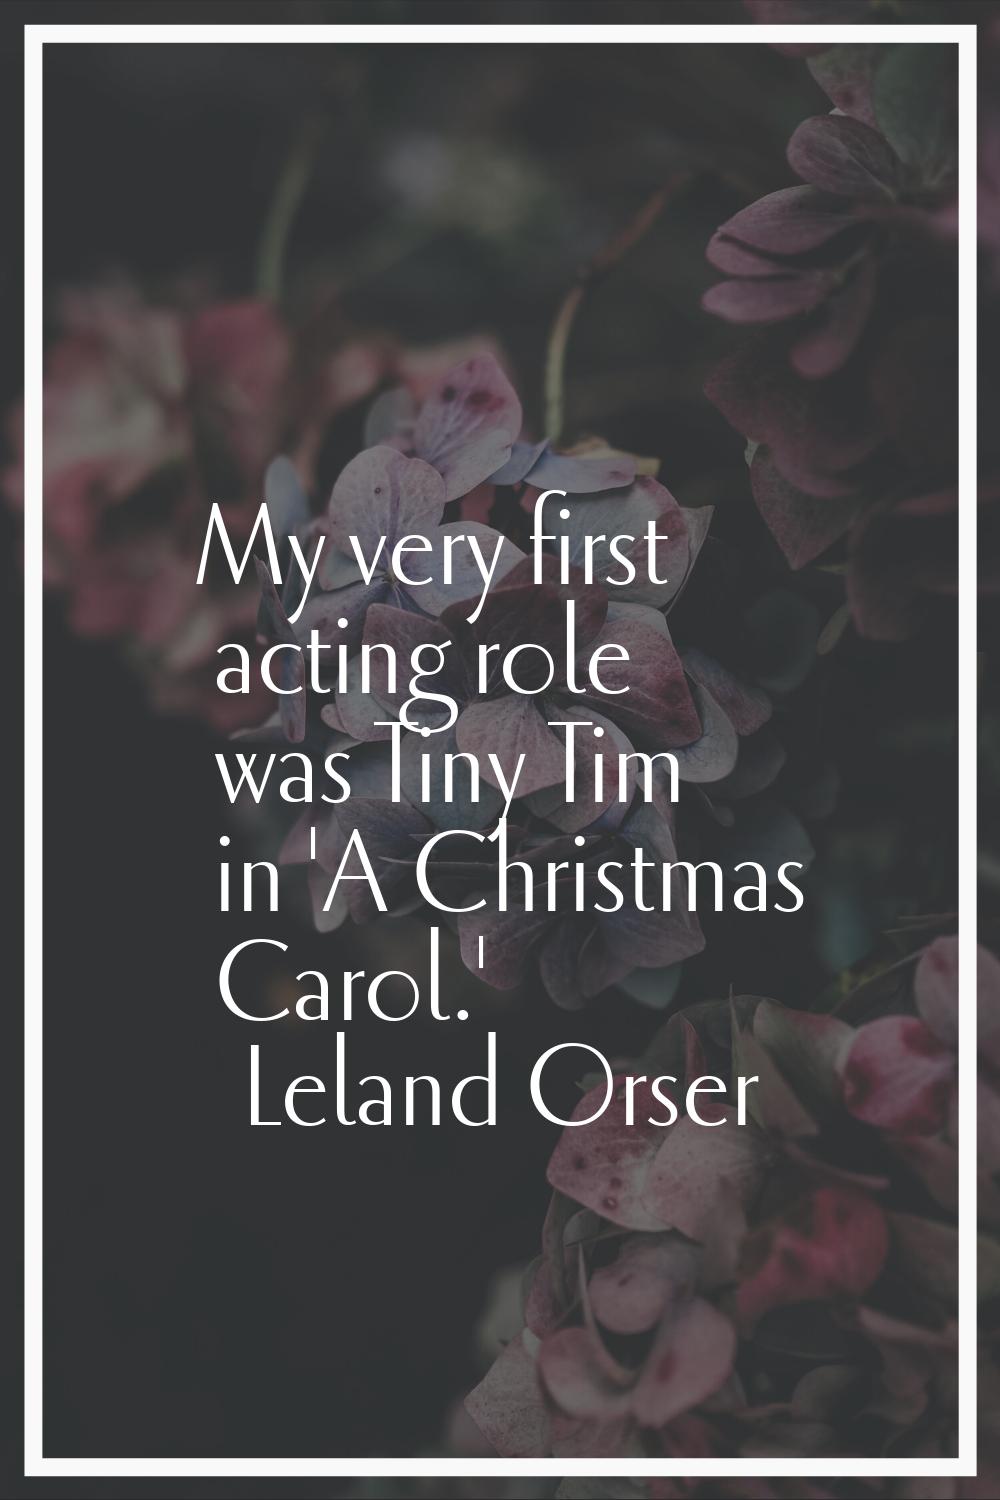 My very first acting role was Tiny Tim in 'A Christmas Carol.'